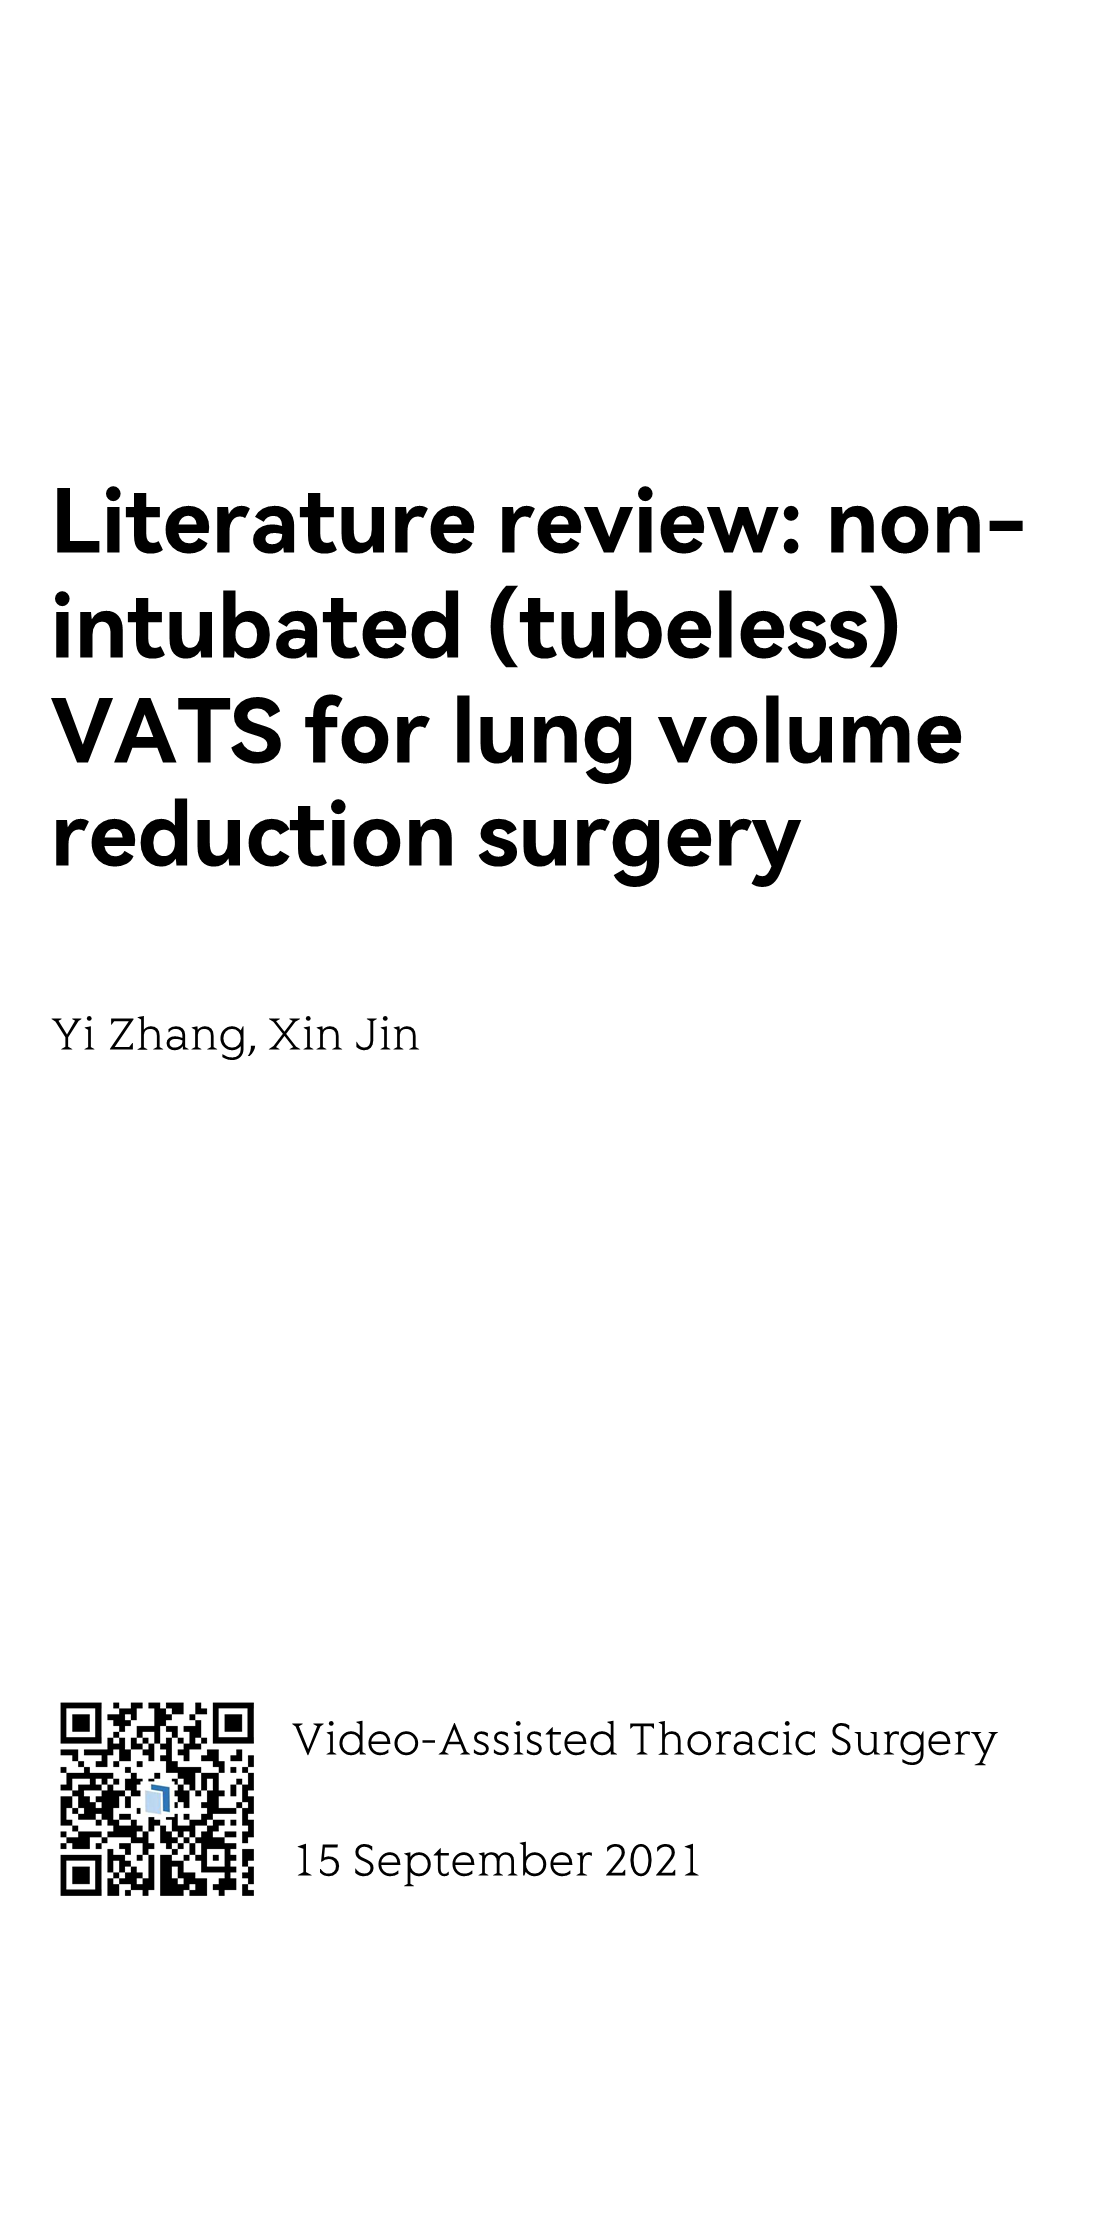 Literature review: non-intubated (tubeless) VATS for lung volume reduction surgery_1